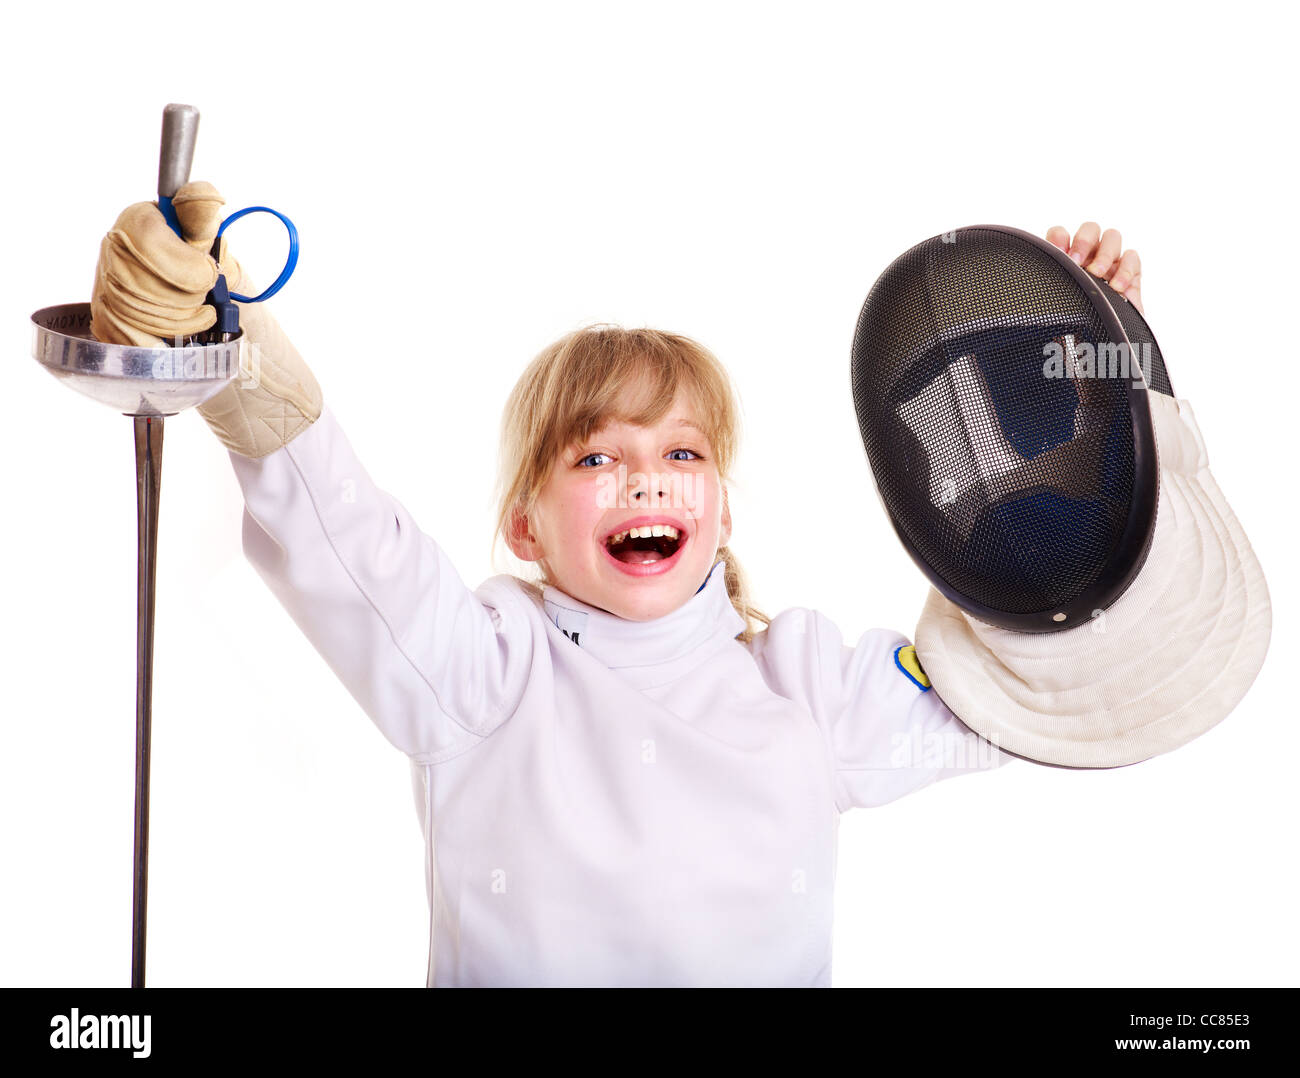 Child in fencing costume holding epee. Isolated. Stock Photo